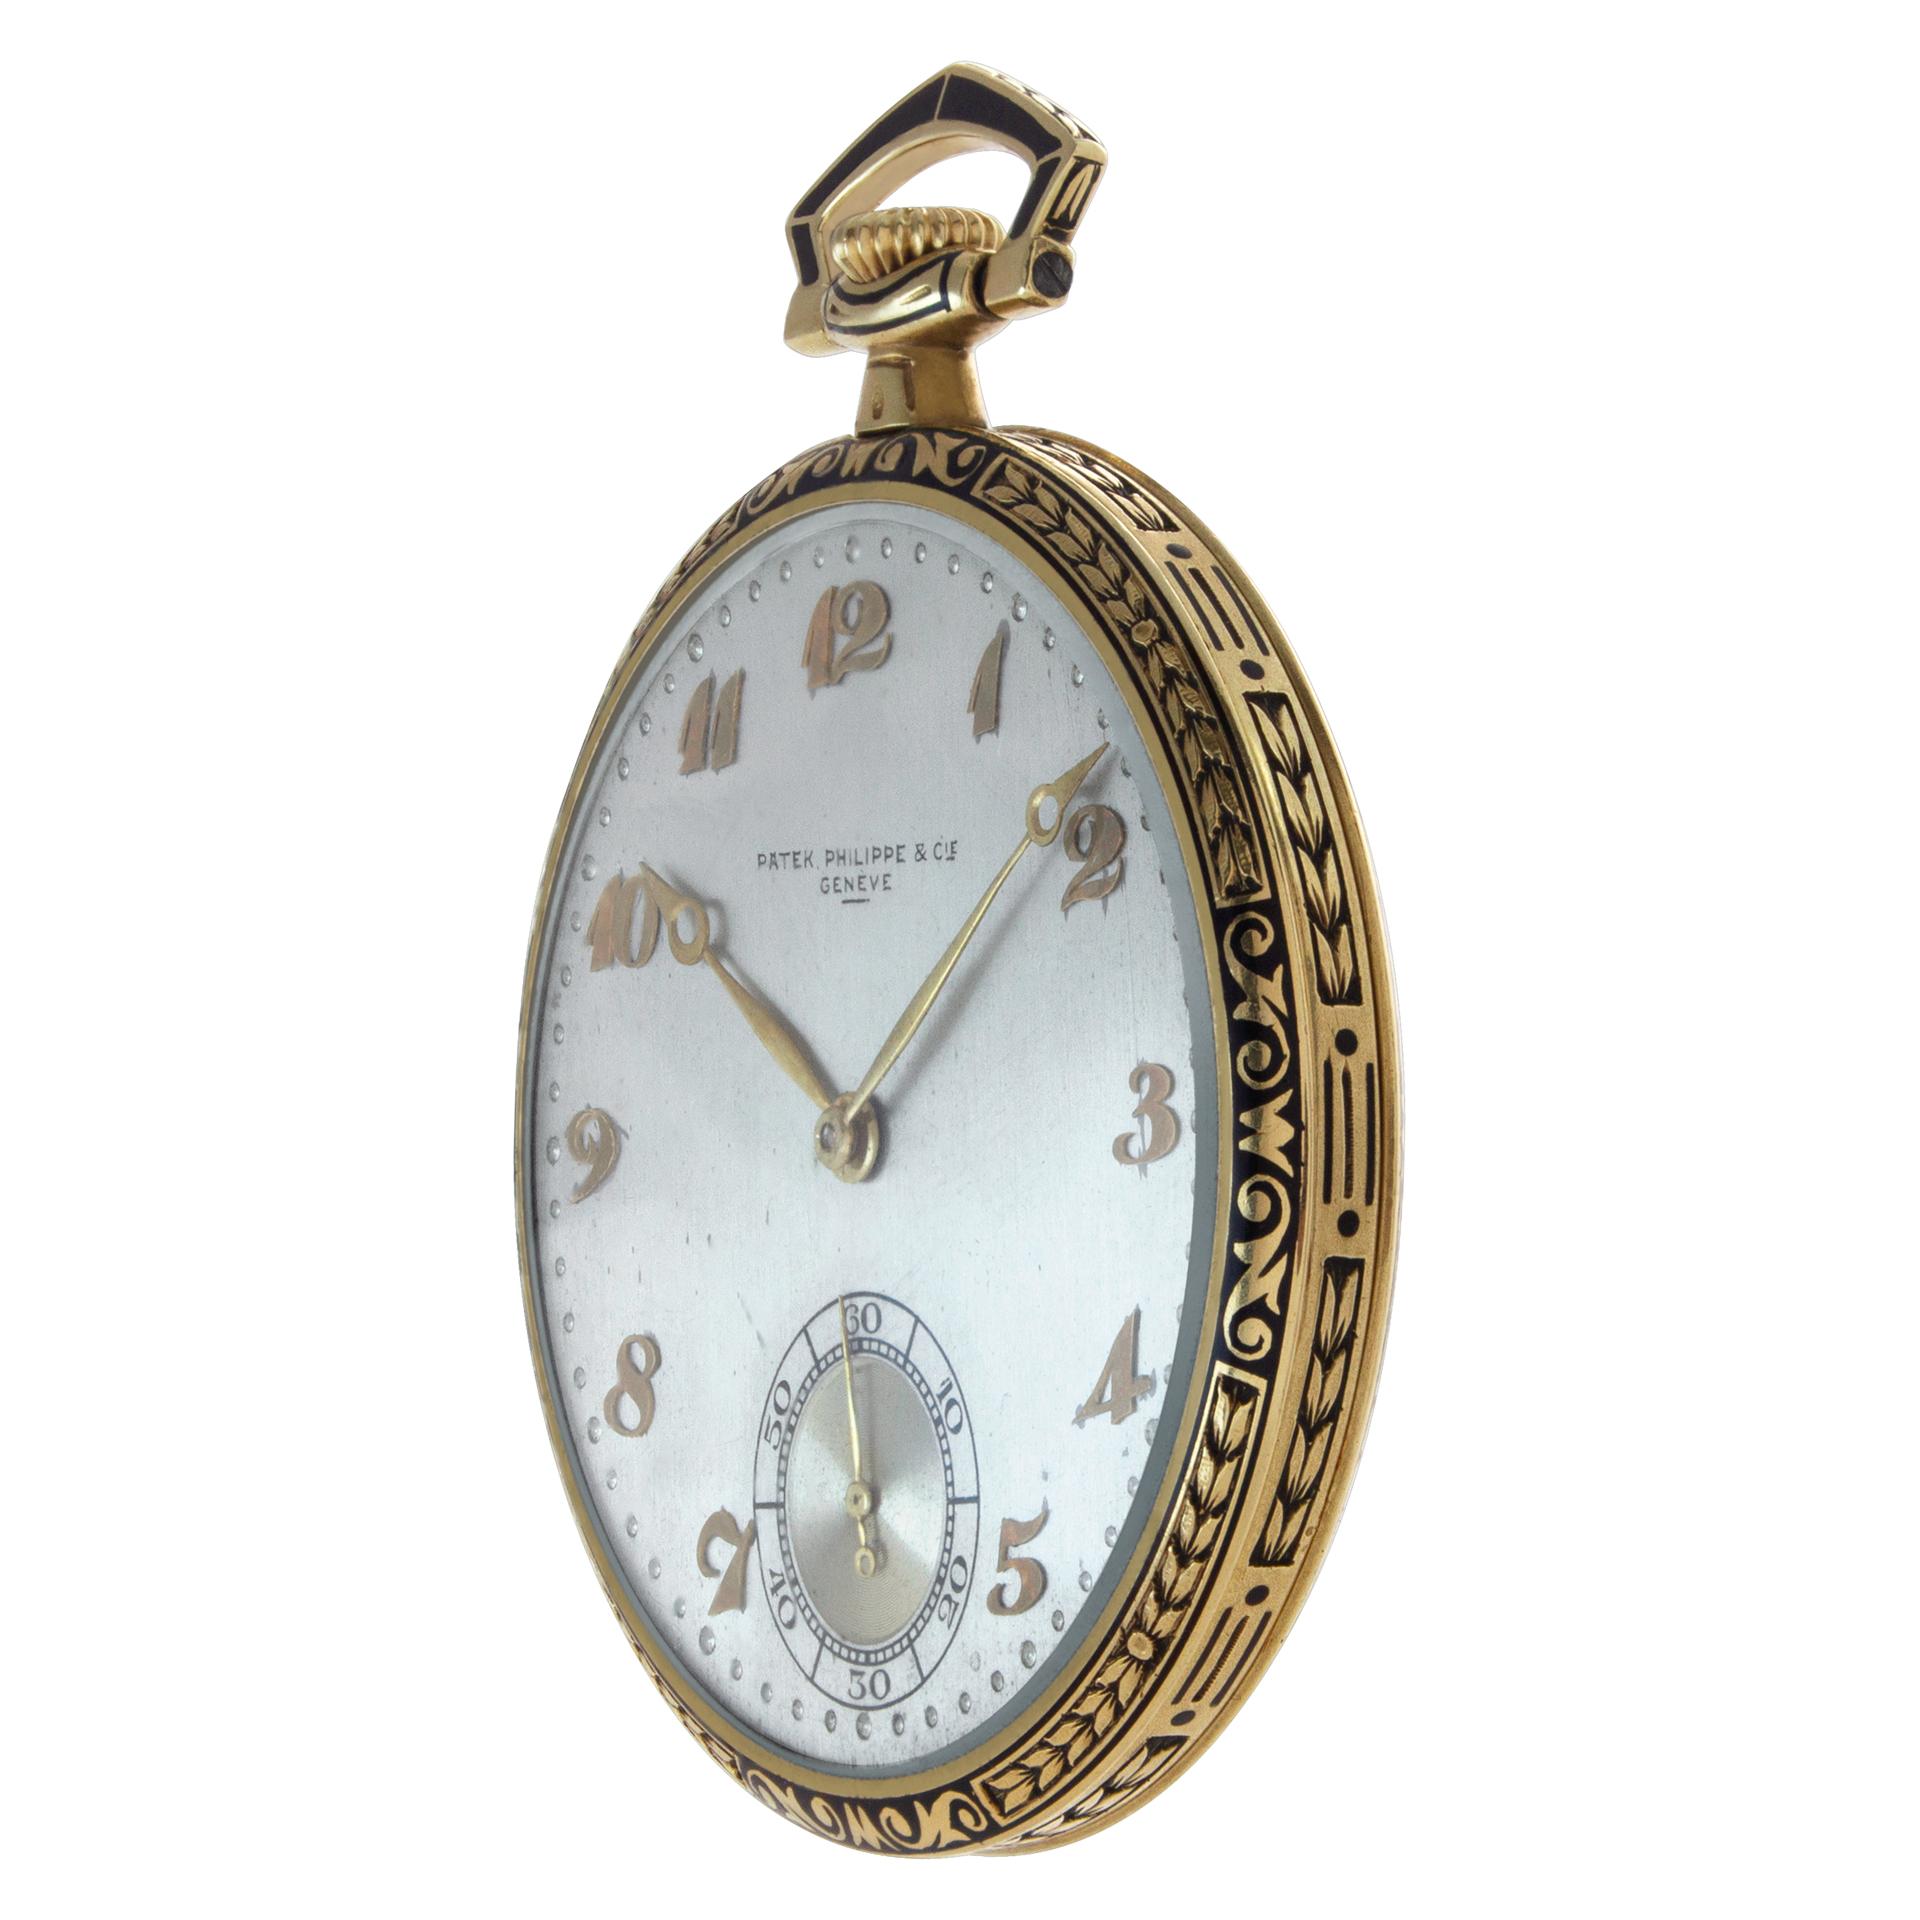 Vintage Art Deco enamel Patek Philippe pocket watch in 18k yellow and white gold. Manual w/ subseconds. 44 mm case size. Circa 1927 Fine Pre-owned Patek Philippe Watch.

Certified preowned Vintage Patek Philippe pocket watch 806660 watch is made out